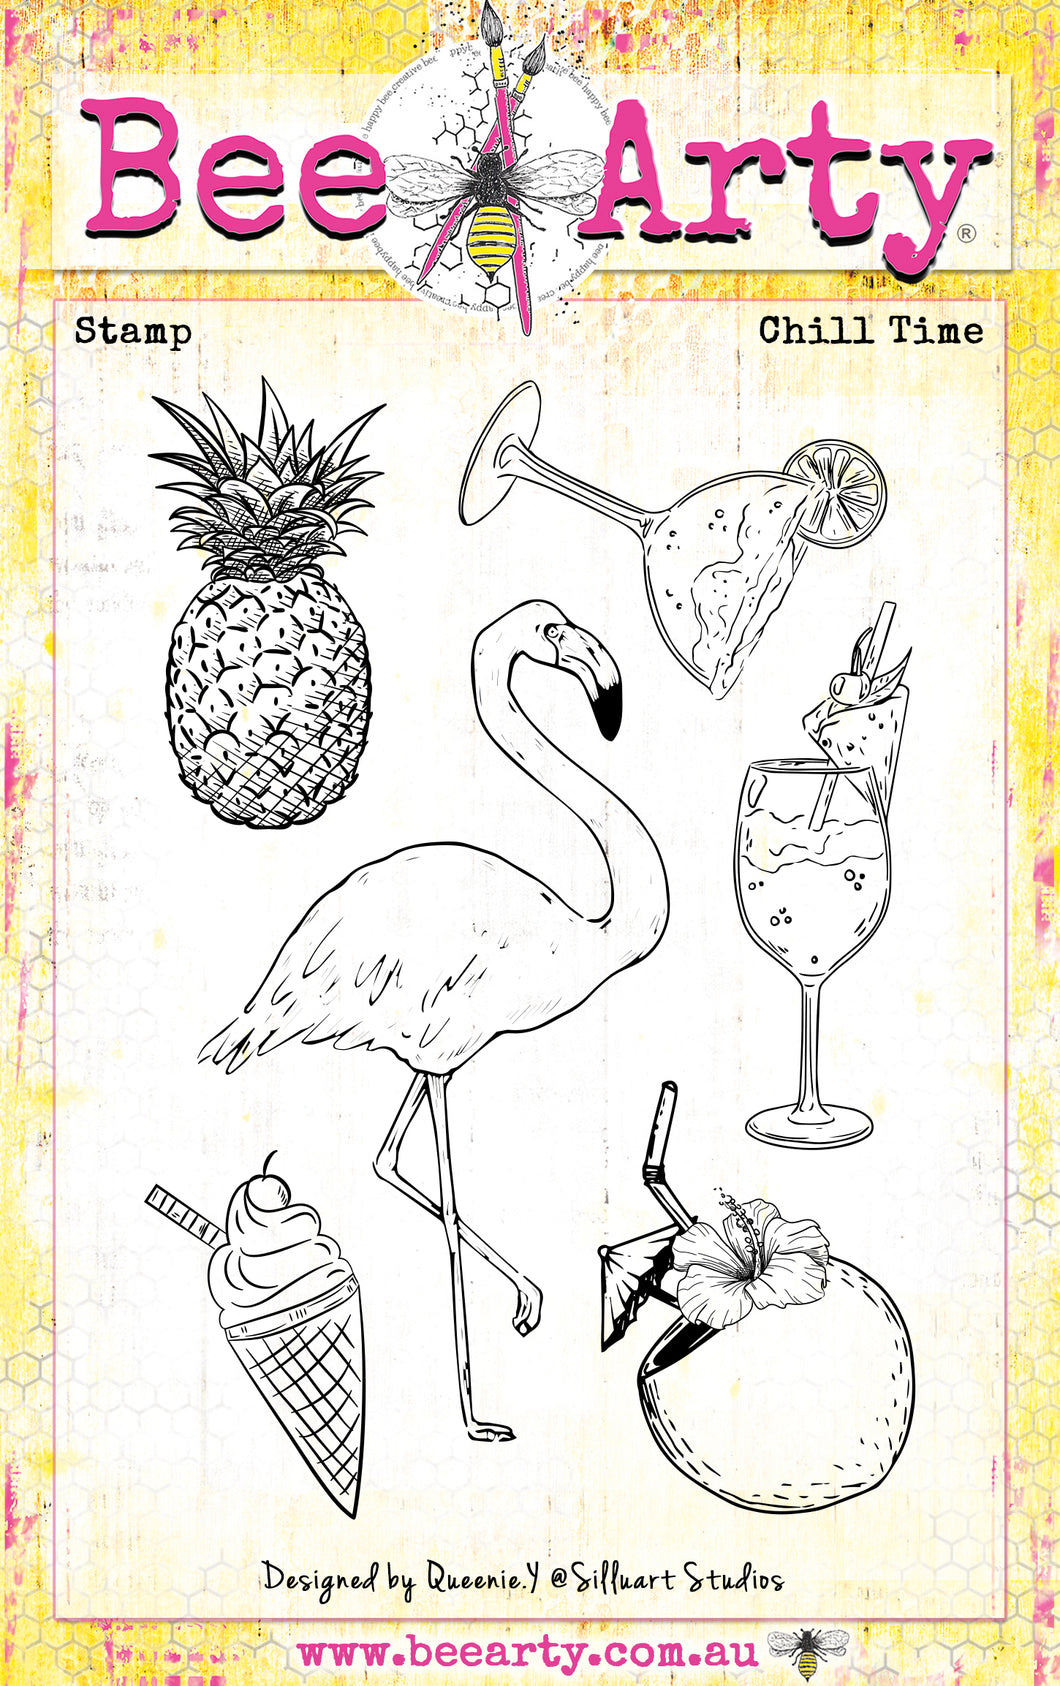 Chill Time - Clear Stamp Set